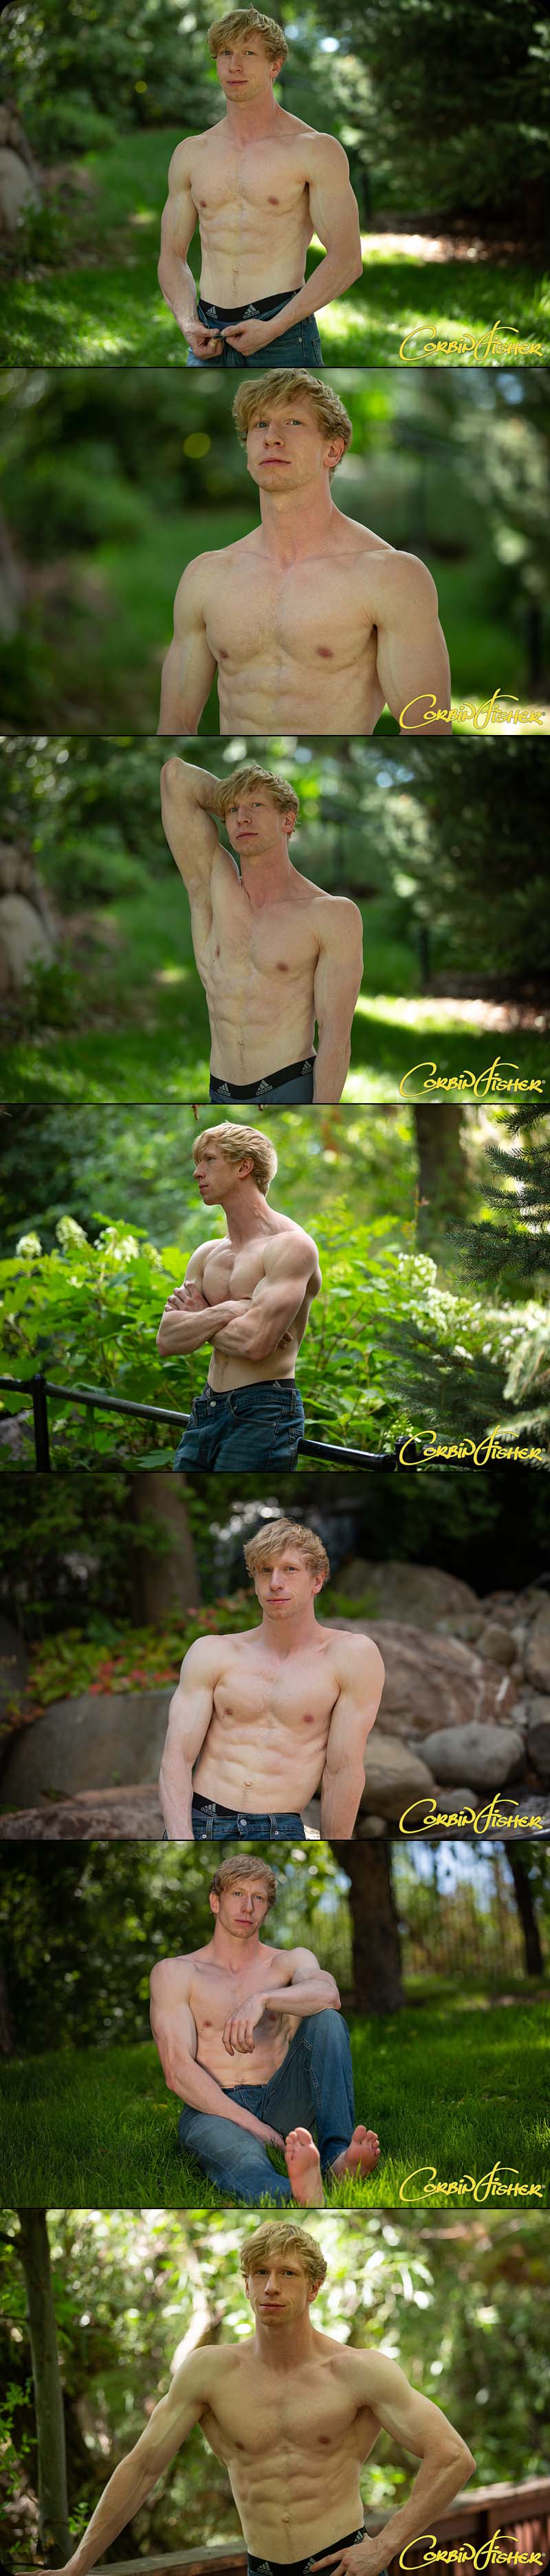 Introducing Jesse (V) at CorbinFisher